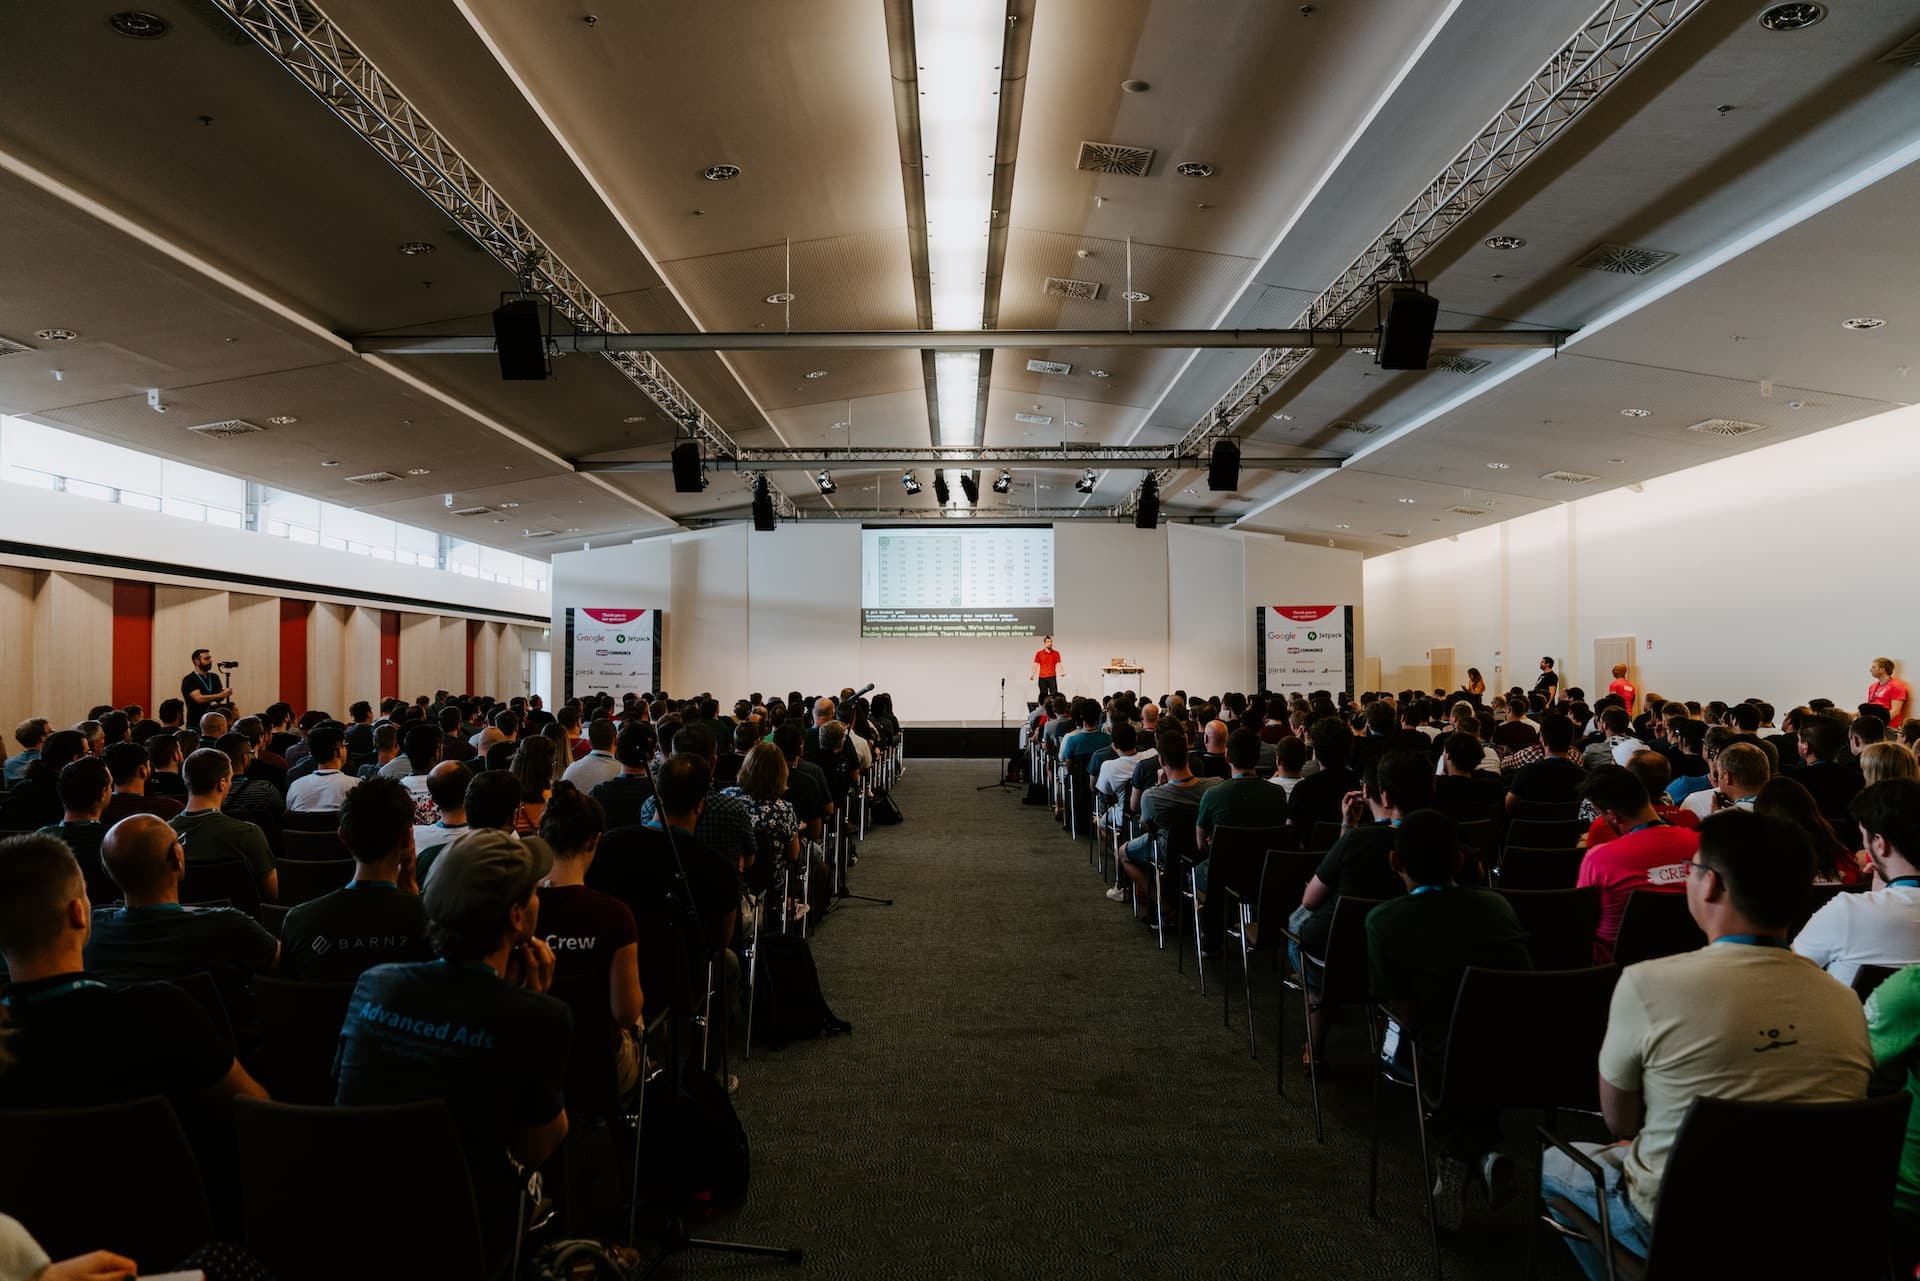 Image Title: Experiential Marketing Summit Engagement Image Description: Professionals attending a session at the Experiential Marketing Summit 2024 Alt Text: Summit Audience Source: https://unsplash.com/photos/men-and-women-sitting-on-chairs-inside-room-_wDZkpybAfY